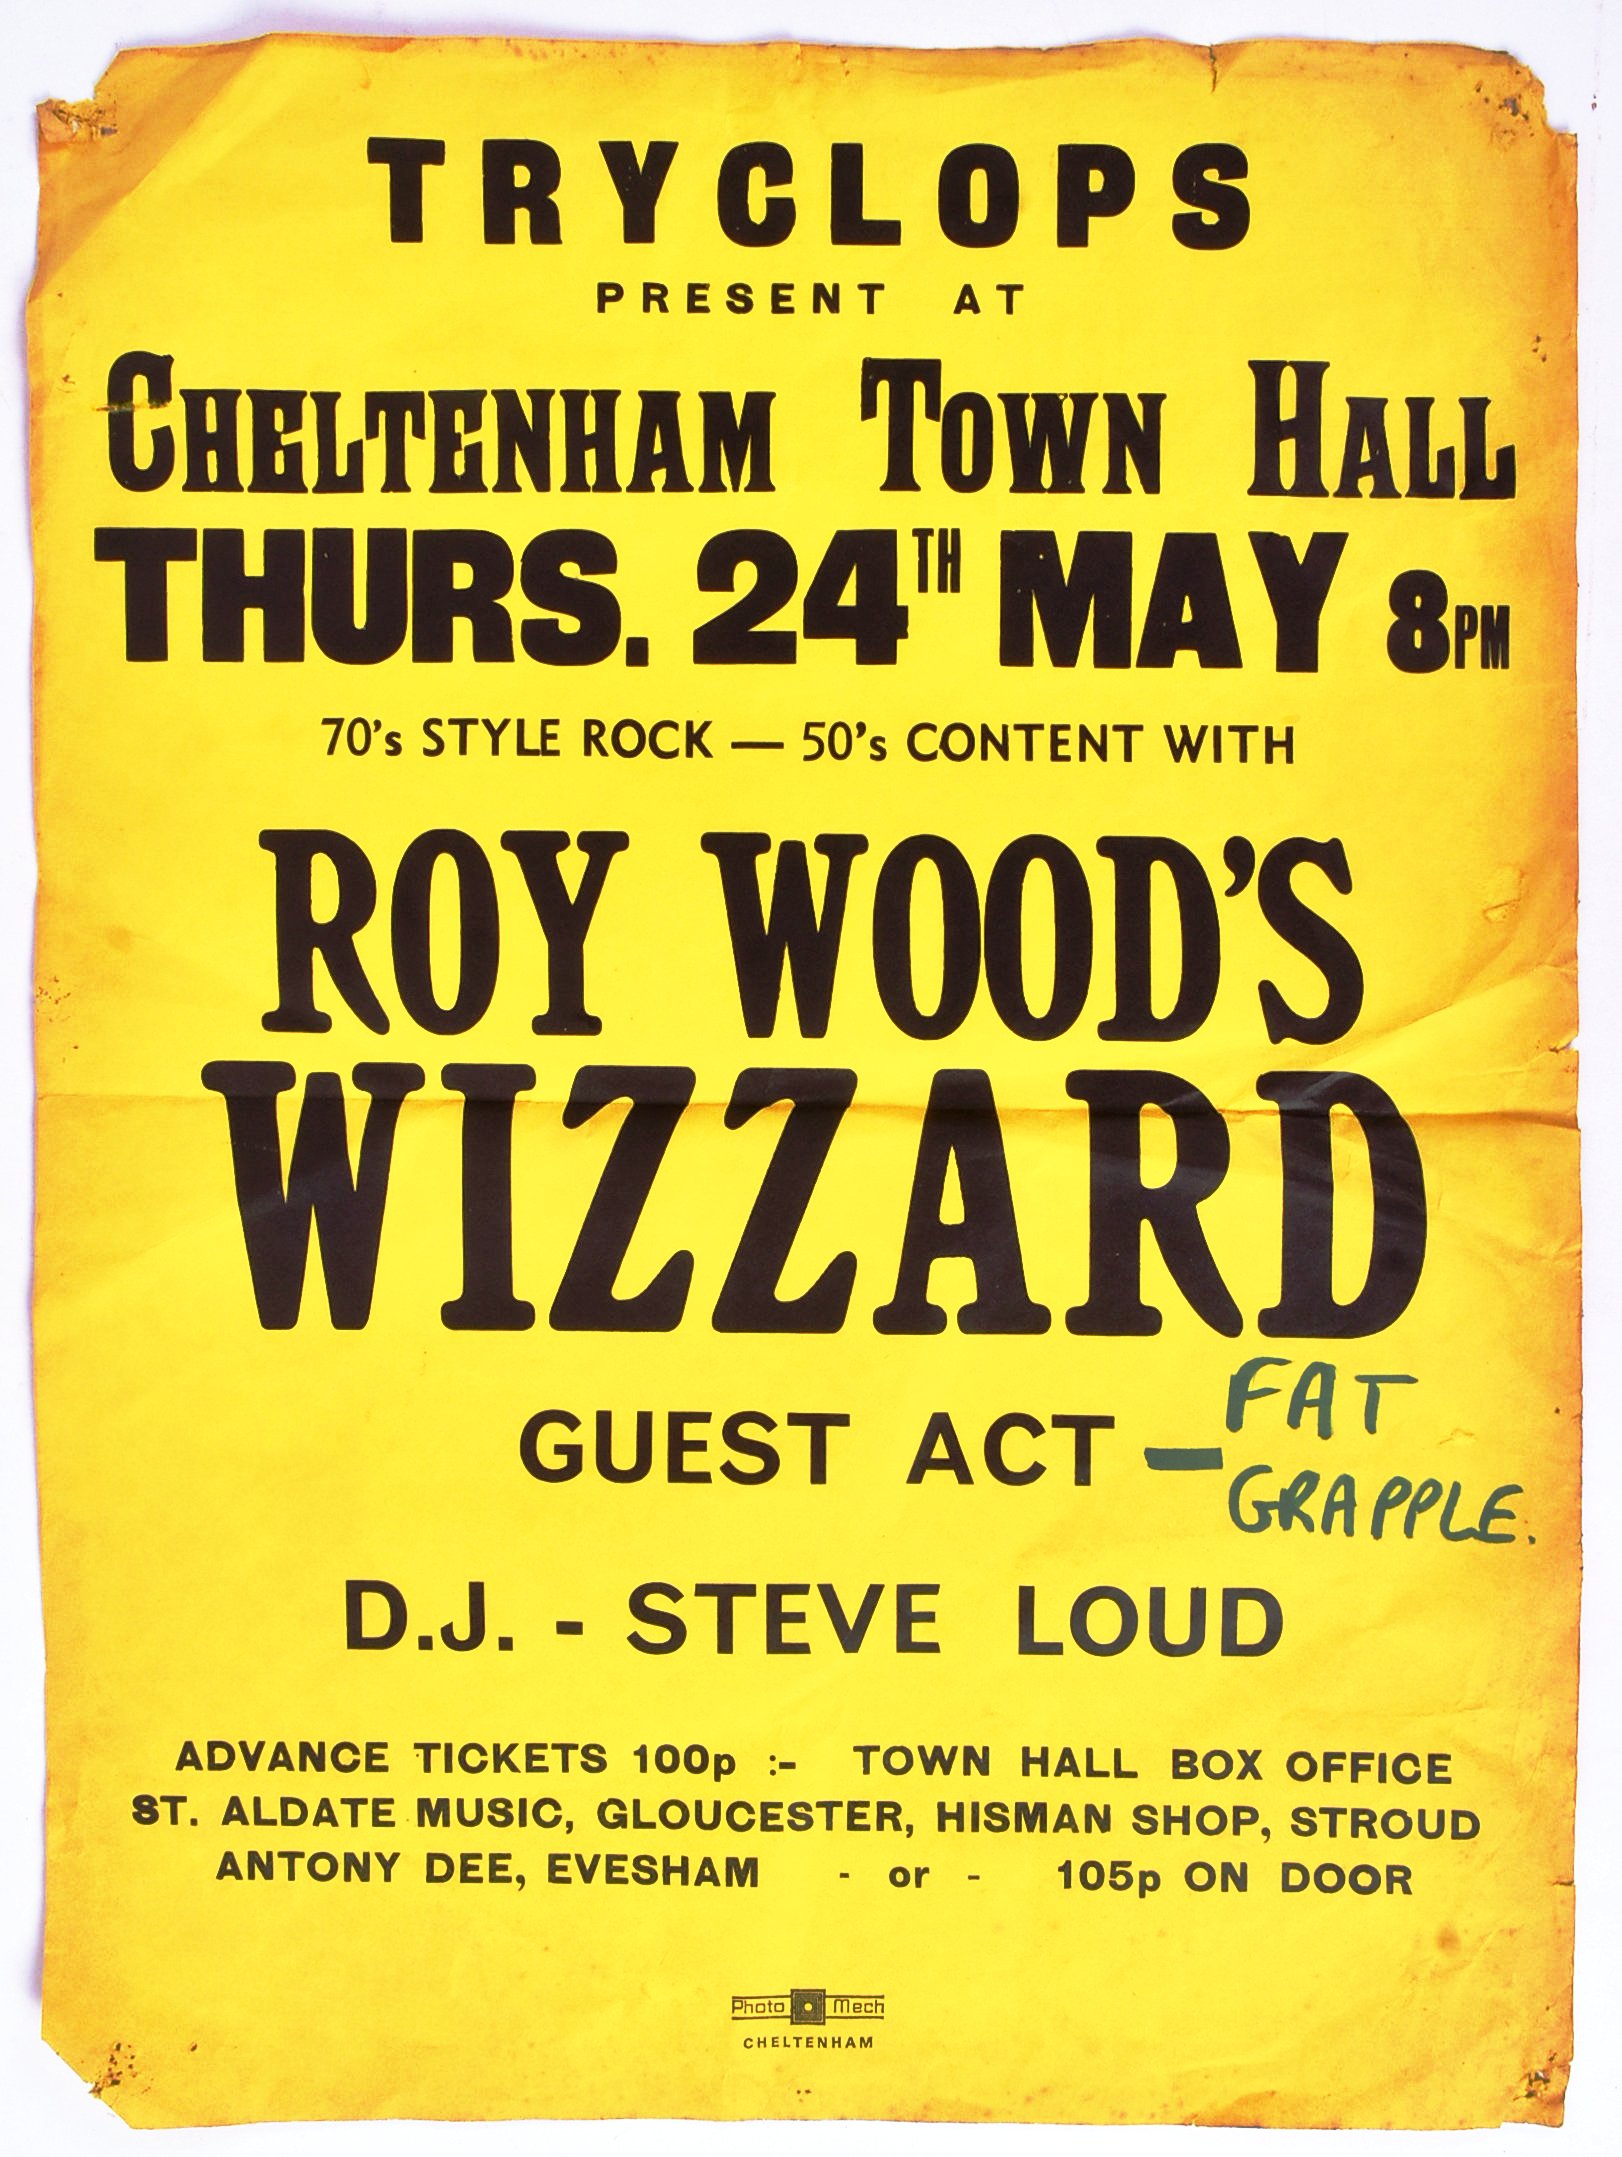 ROY WOOD'S WIZZARD - VINTAGE POSTER FROM CHELTENHAM TOWN HALL